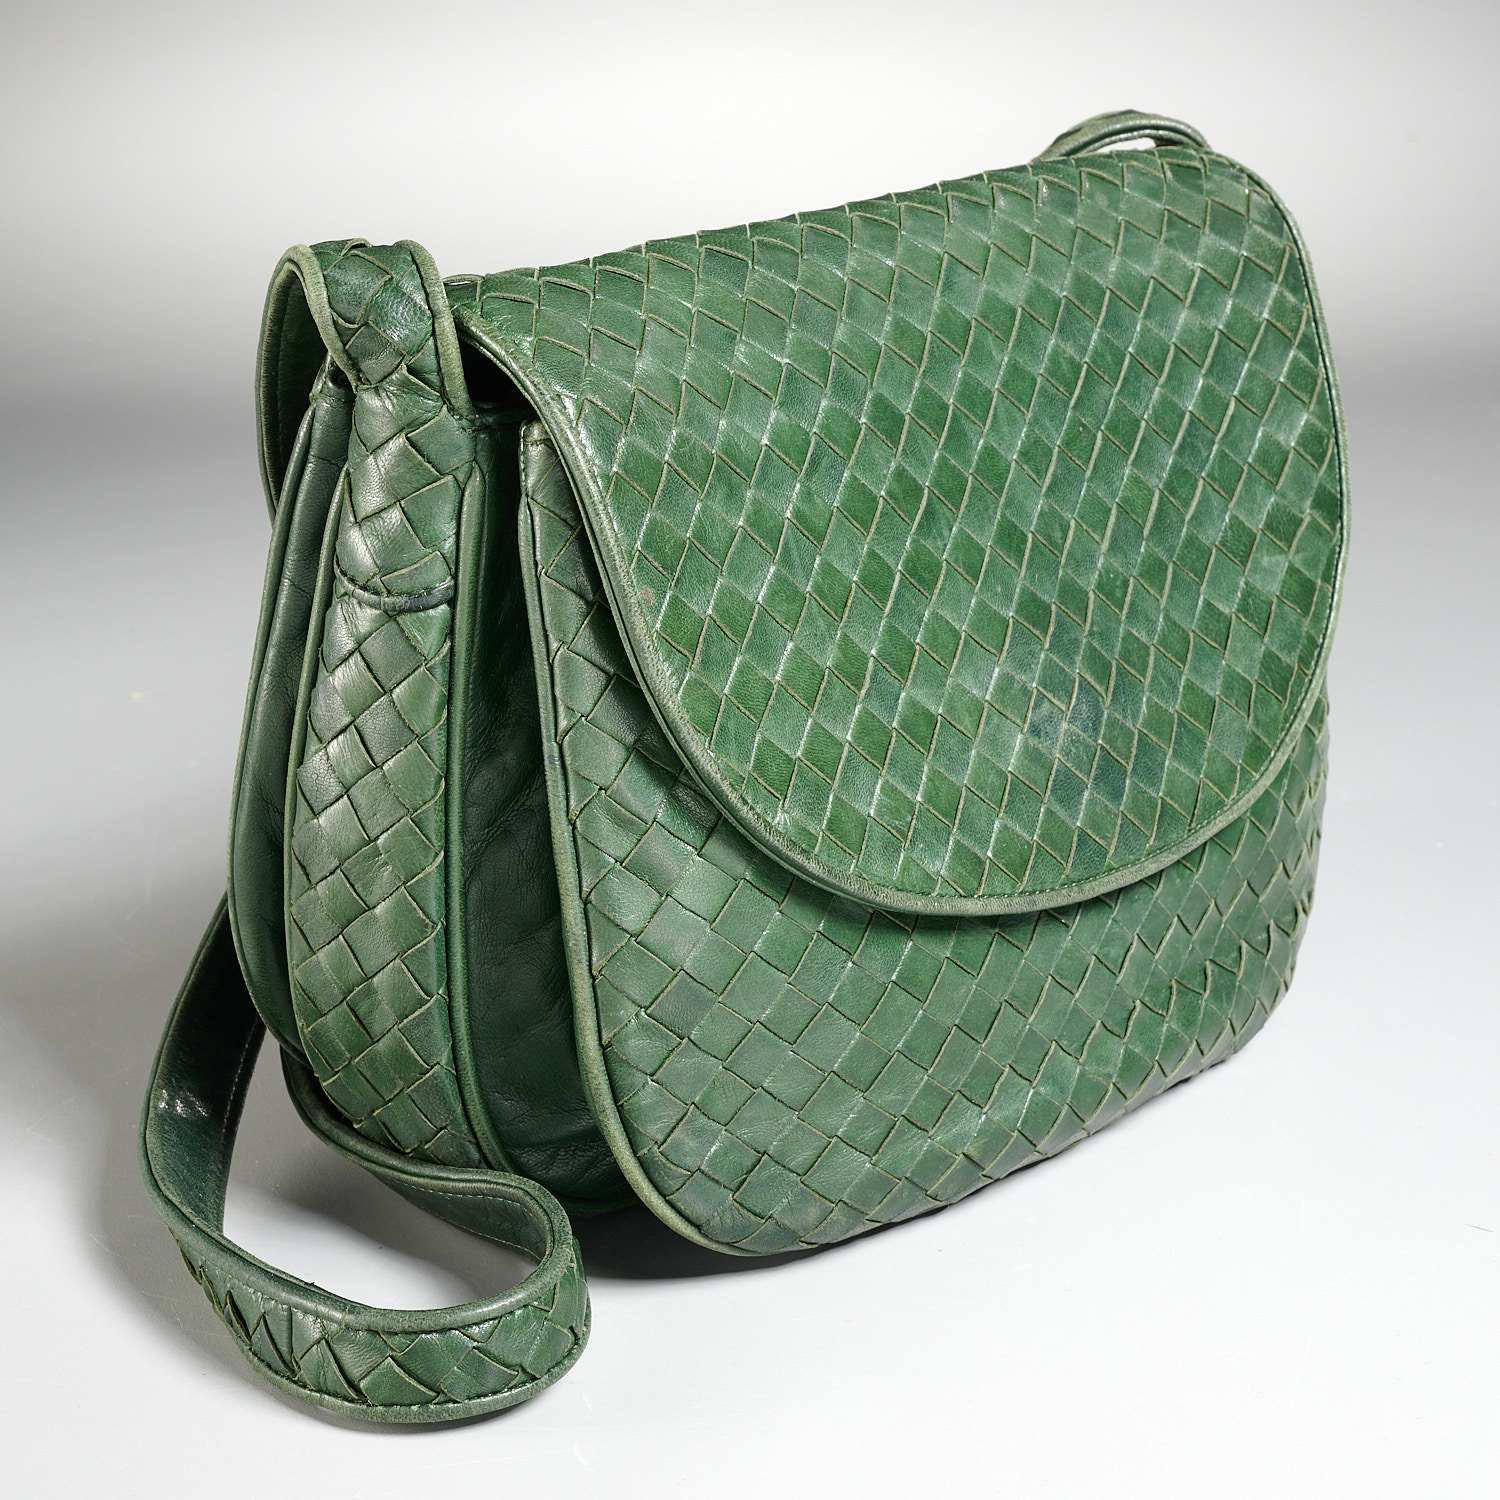 Sway Leather Woven Crossbody Bag